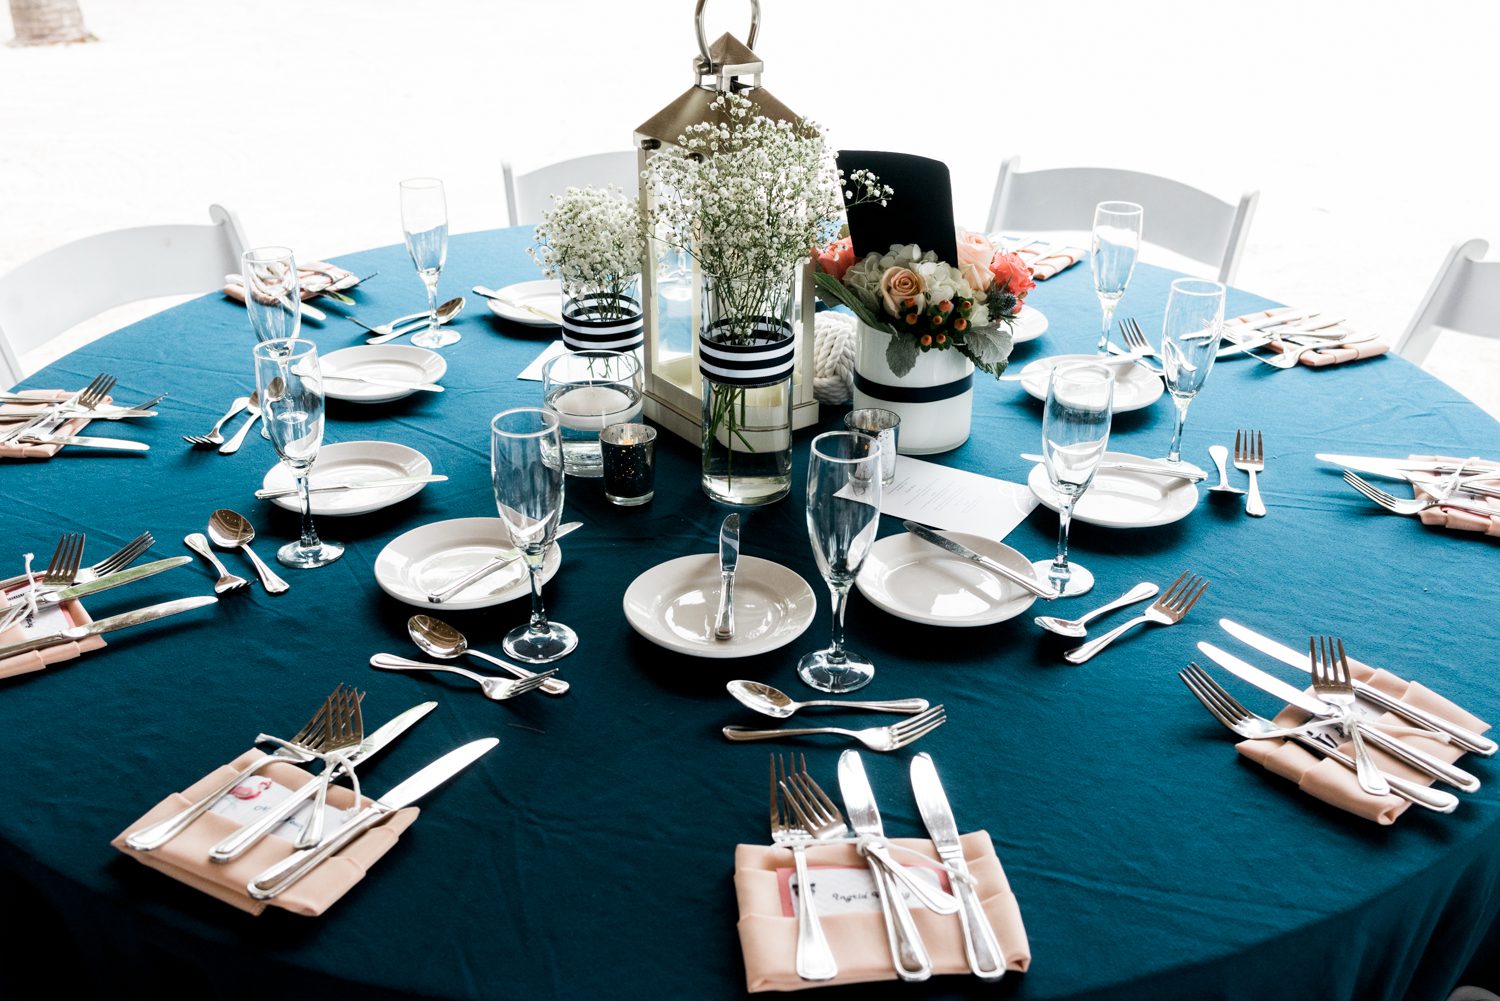 A Florida Keys wedding table setting at the Postcard Inn with blue accents and silverware, adorned with napkins.